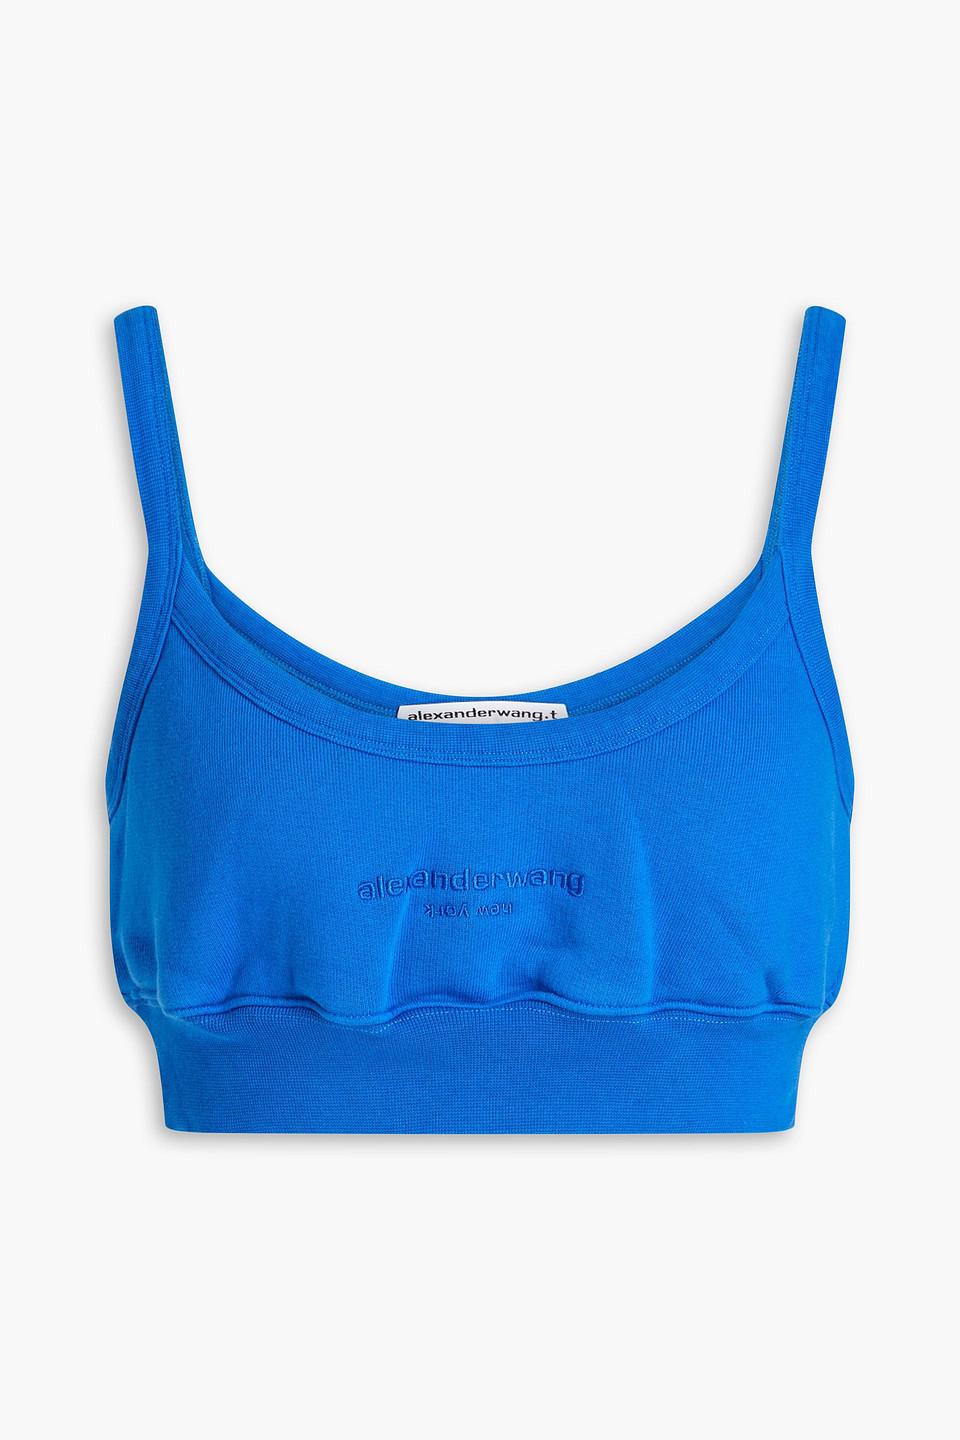 T By Alexander Wang Embroidered Cotton-fleece Bra Top in Blue